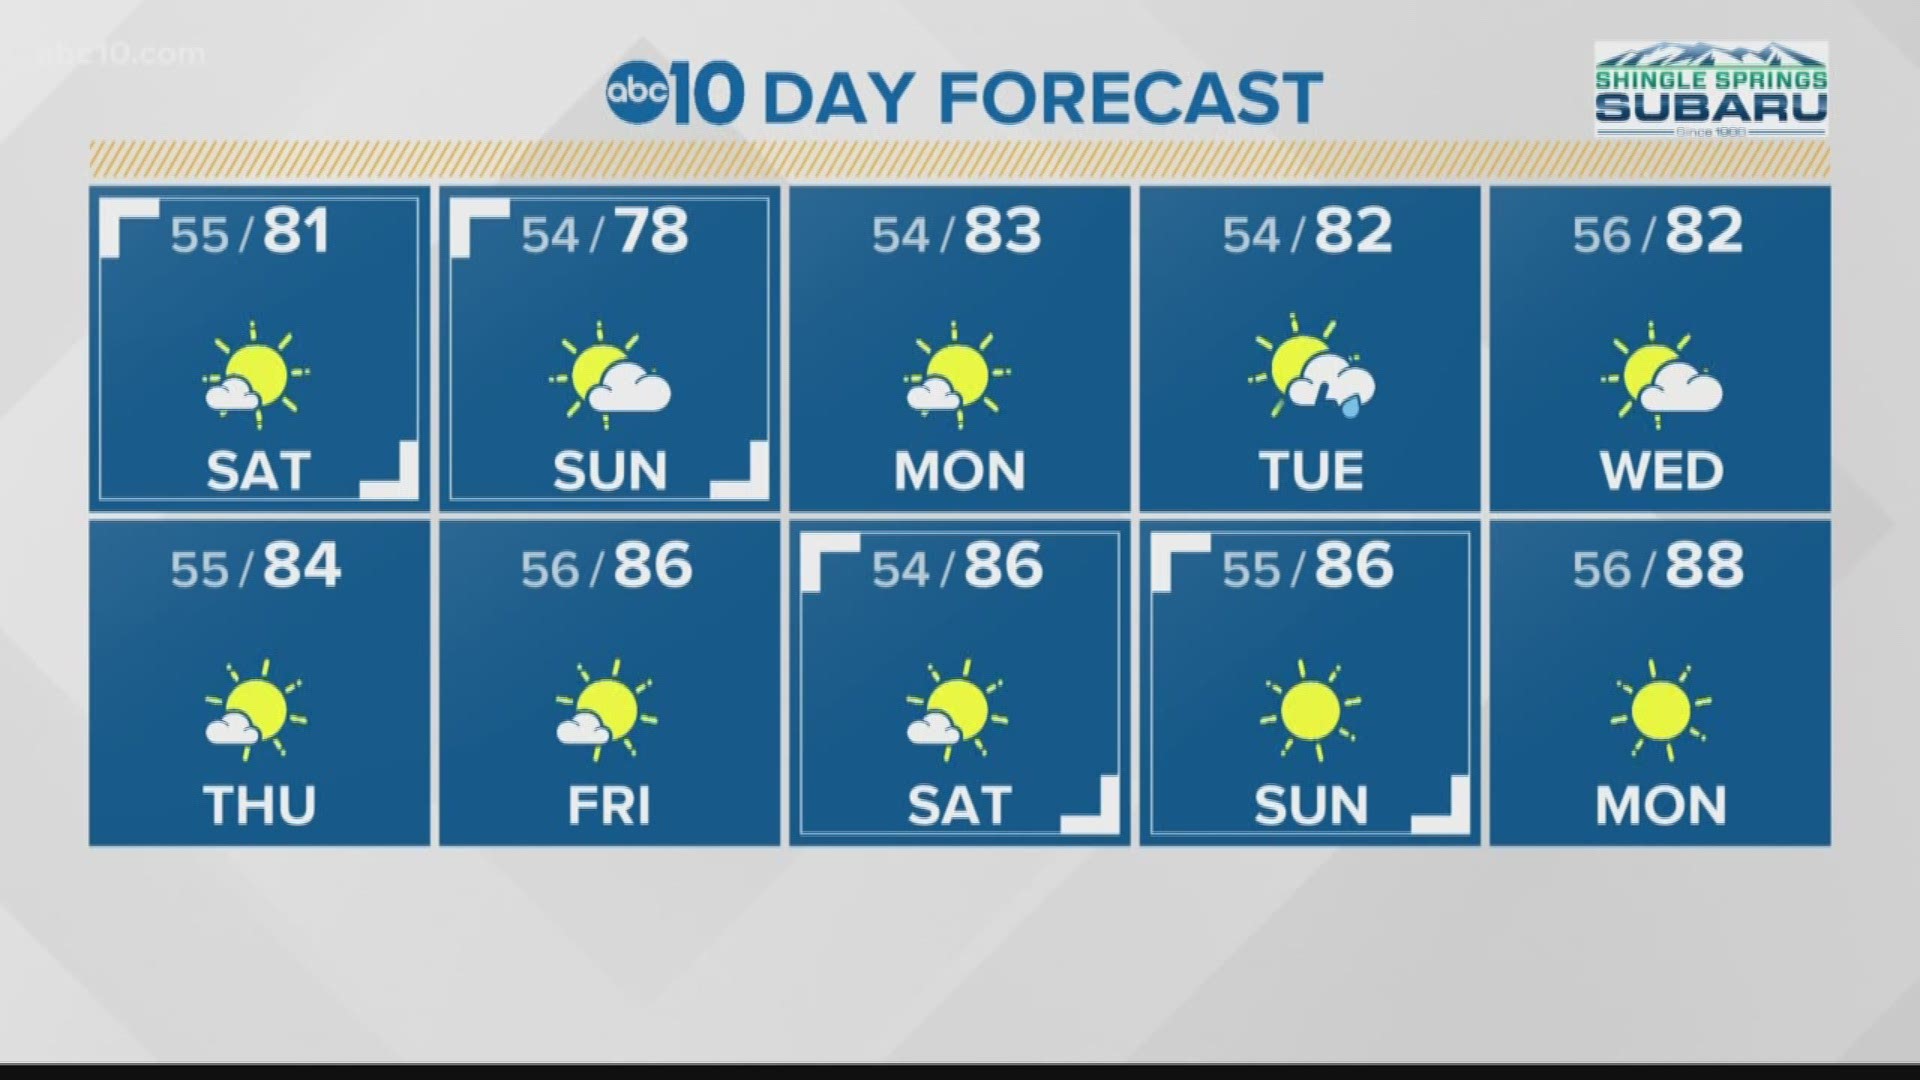 Local morning forecast: May 19, 2018